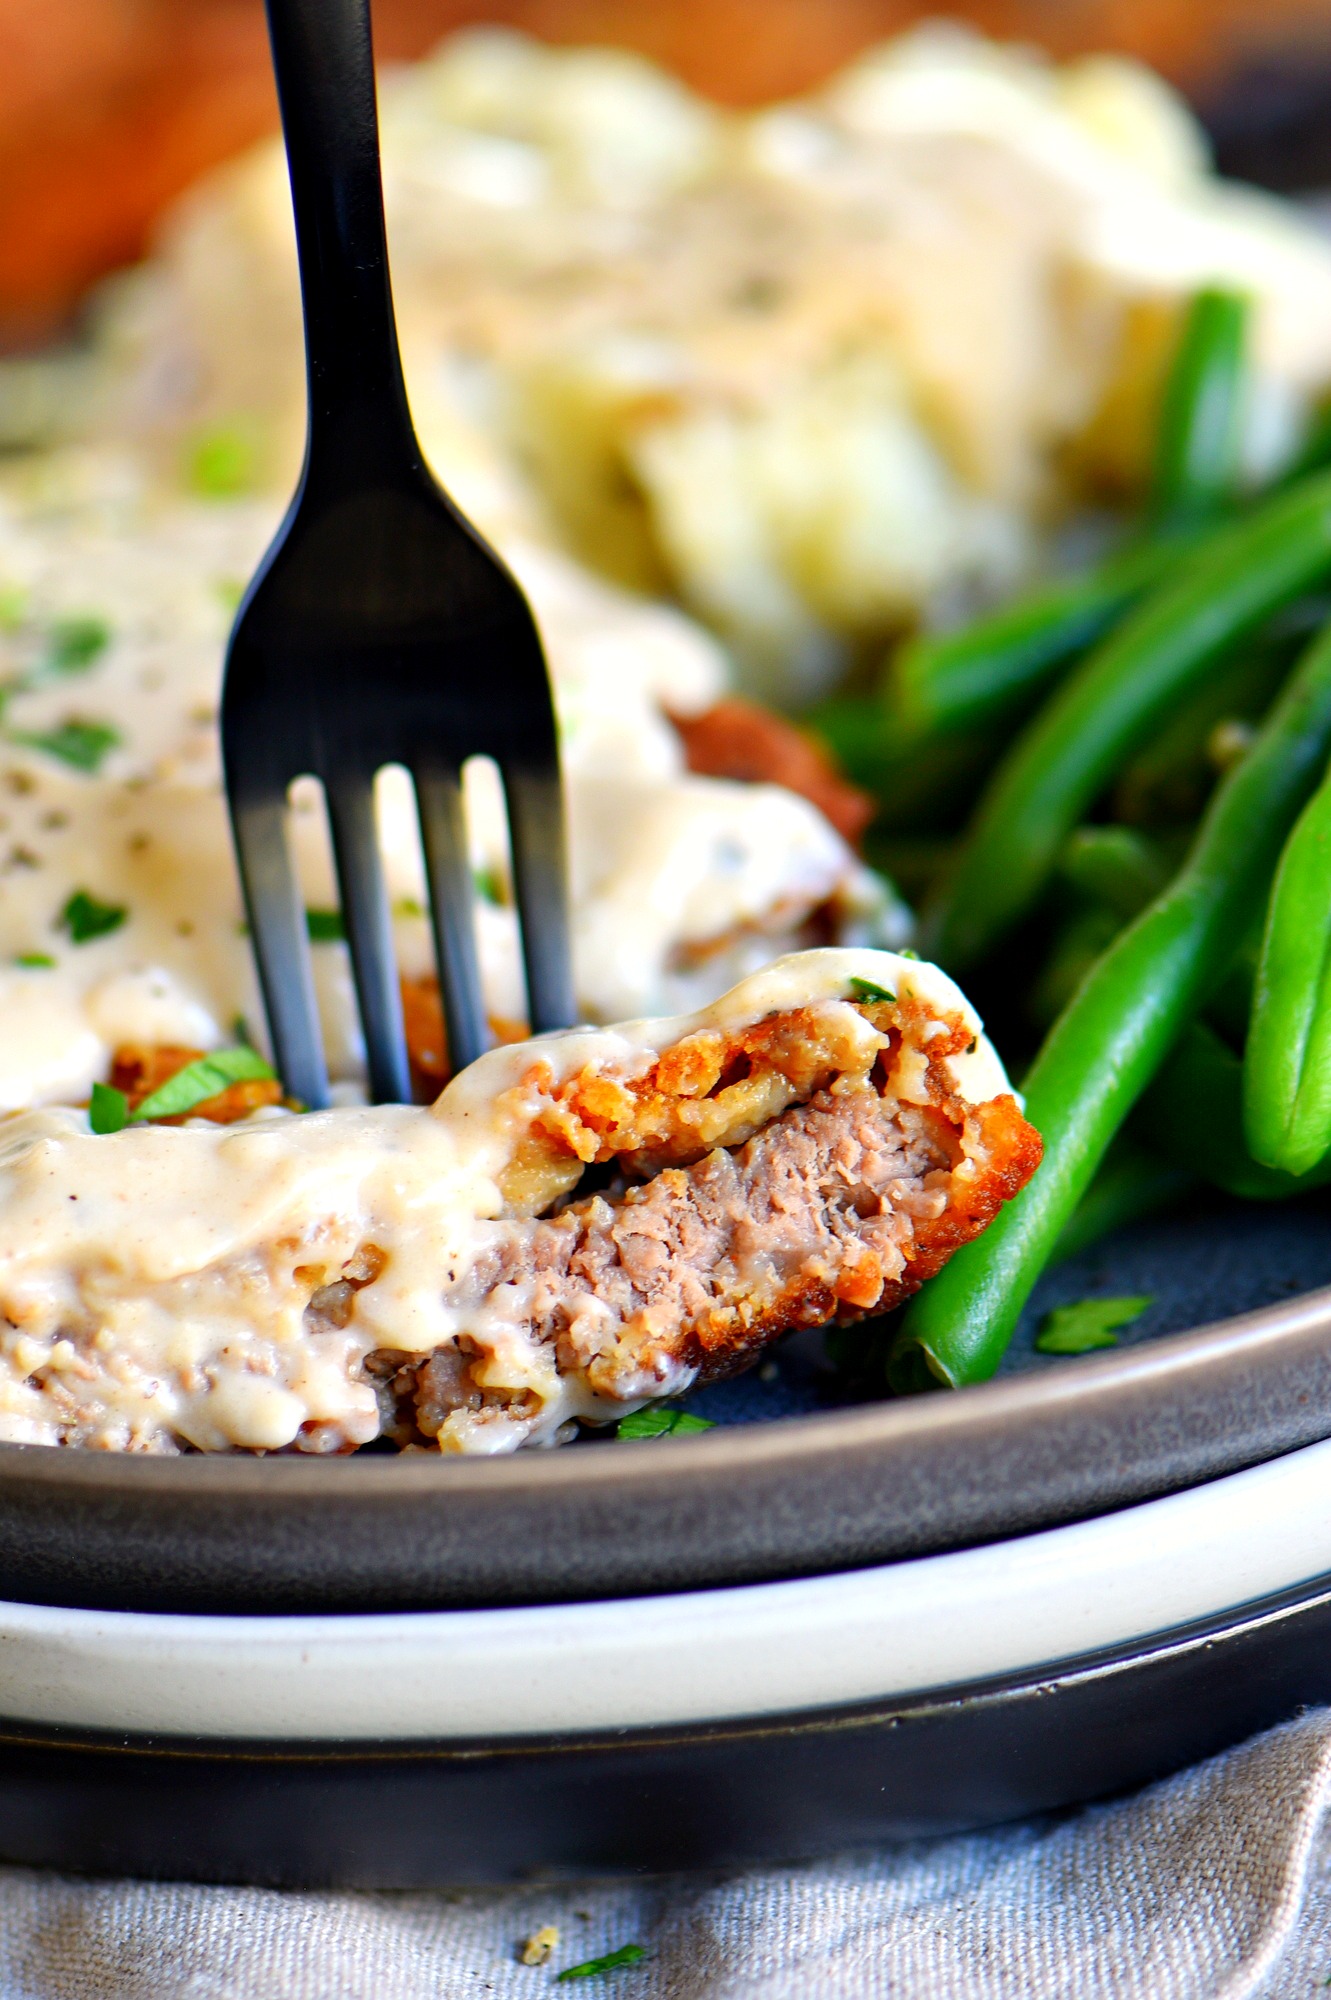 The Ultimate Chicken Fried Steak Recipe with Gravy - Mom On Timeout